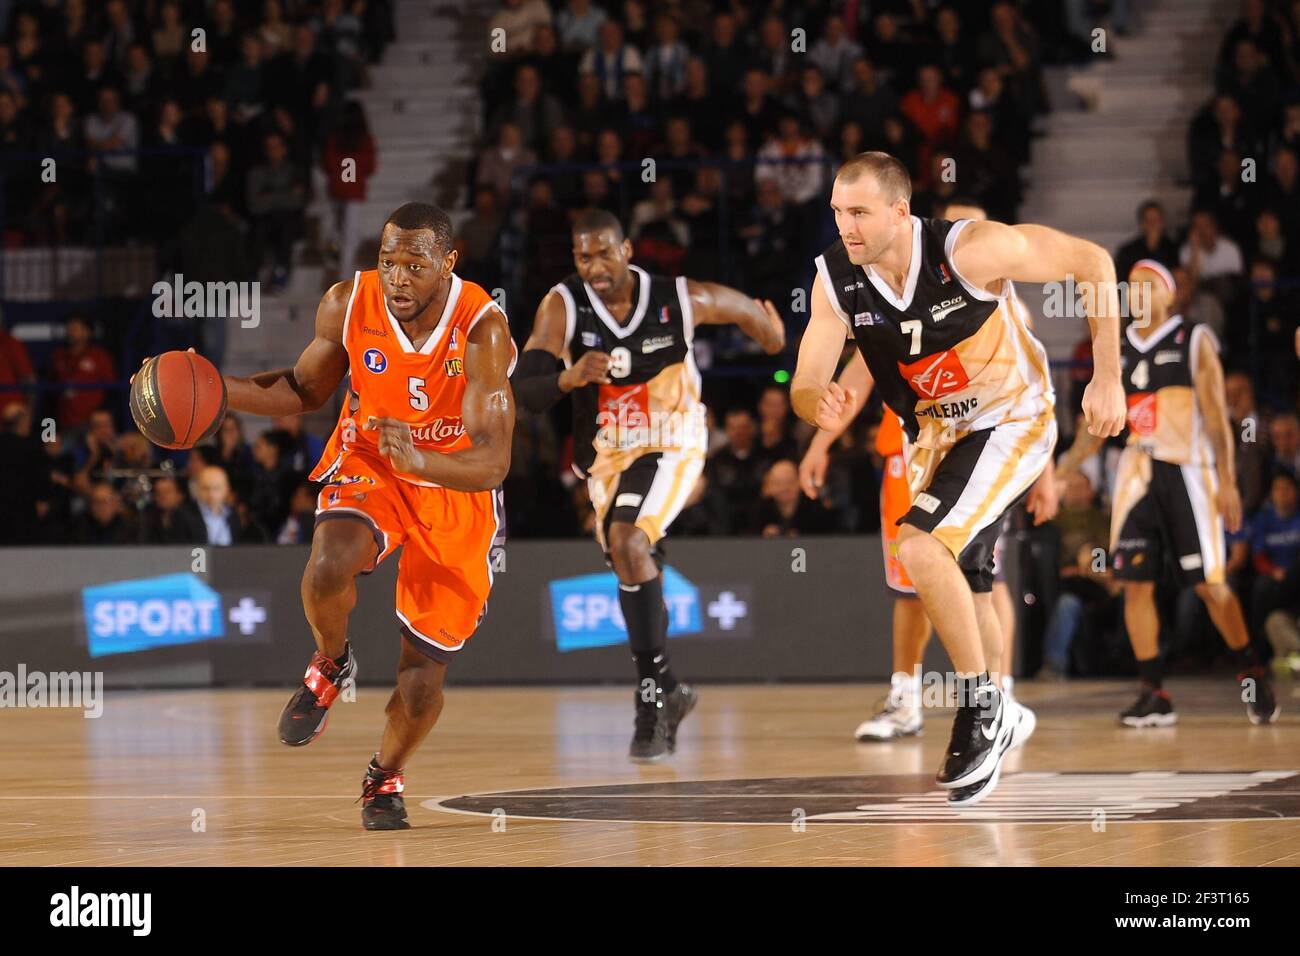 BASKETBALL - SEMAINE DES AS 2012 - ROANNE (FRA) - 1/4 FINAL - LE MANS v  ORLEANS - 16/02/2012 - PHOTO : PASCAL ALLEE / HOT SPORTS / DPPI - CHARLES  LOMBAHE-KAHUDI (MSB) / DAVID MONDS AND BRIAN GREENE (ORLEANS Stock Photo -  Alamy